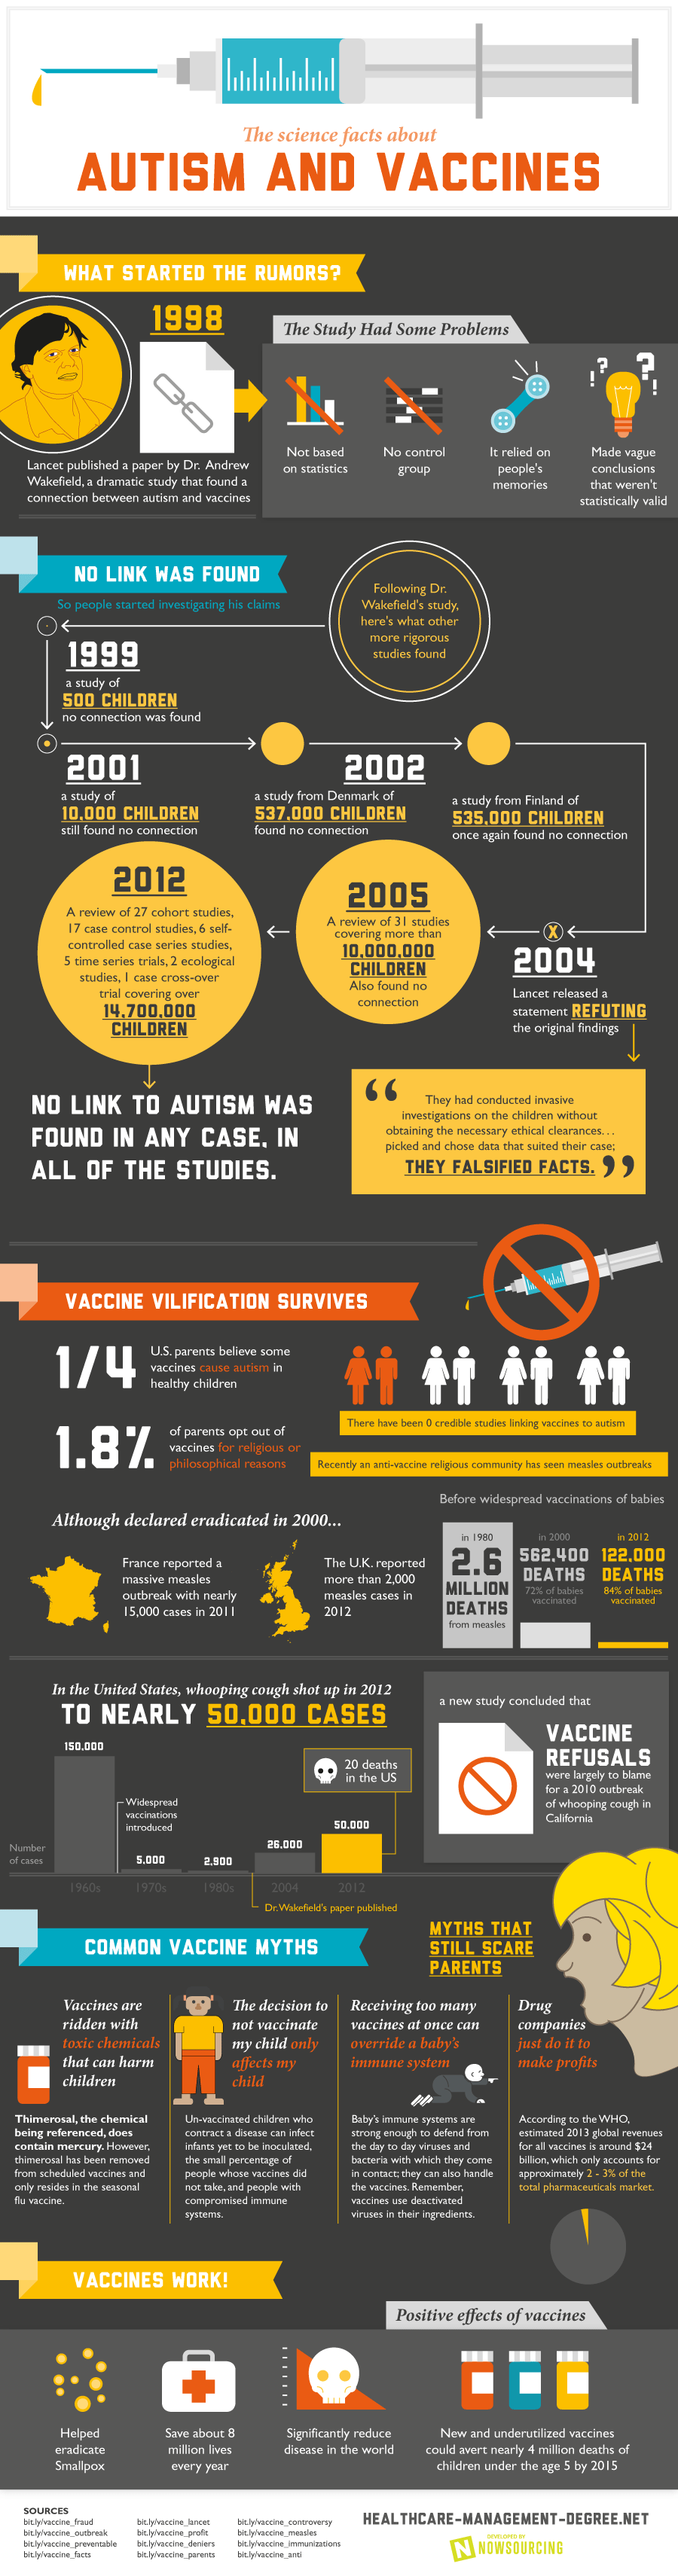 Vaccines and Autism